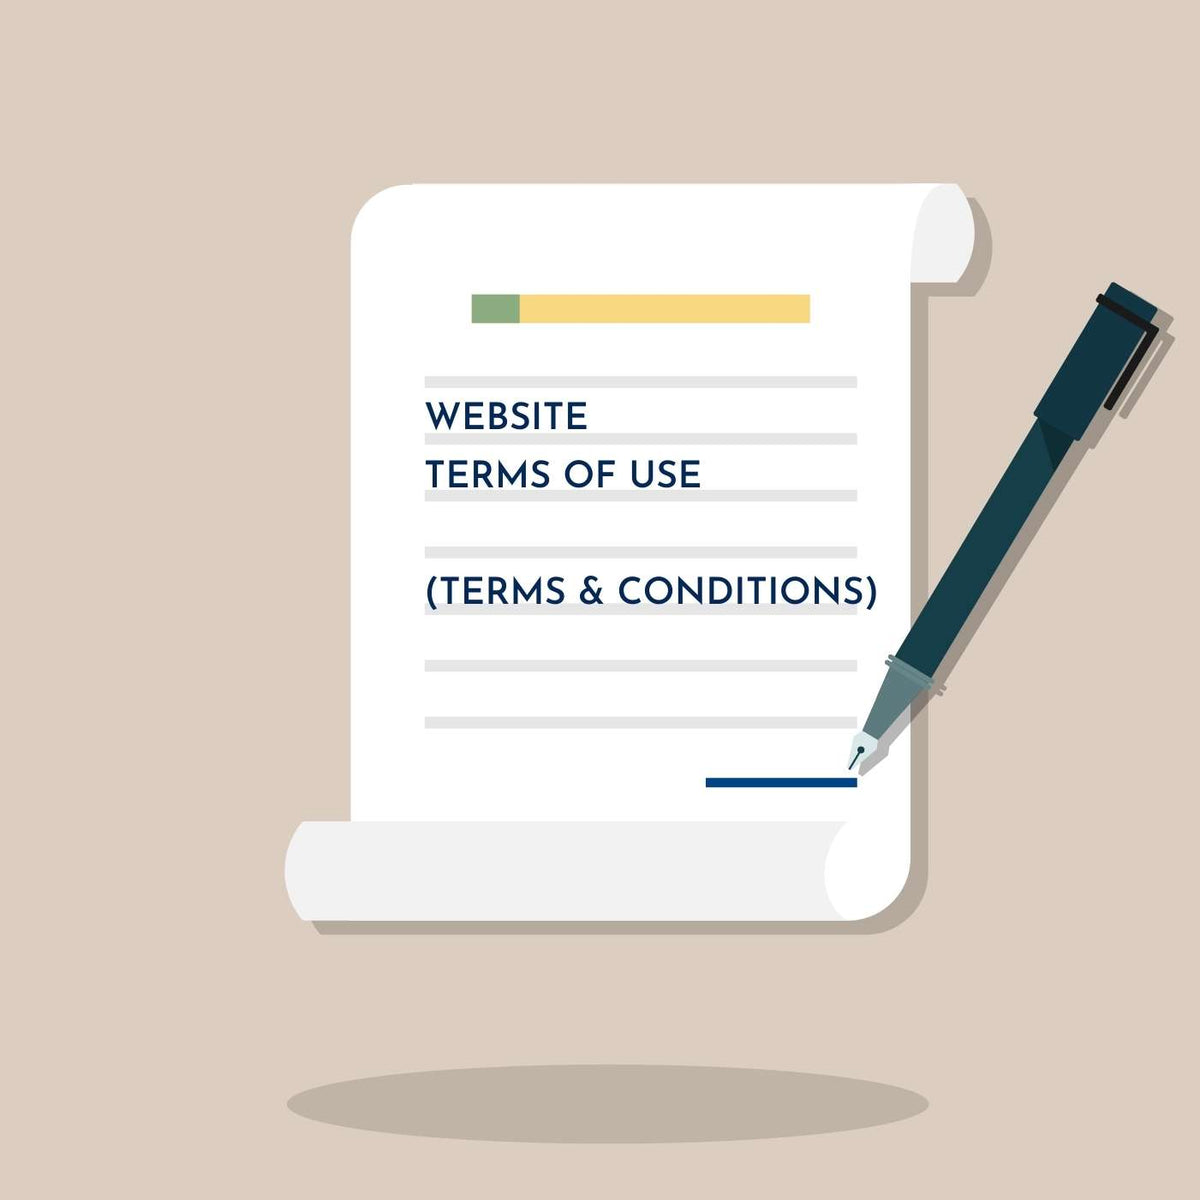 Website Terms and Conditions (Terms of Use)